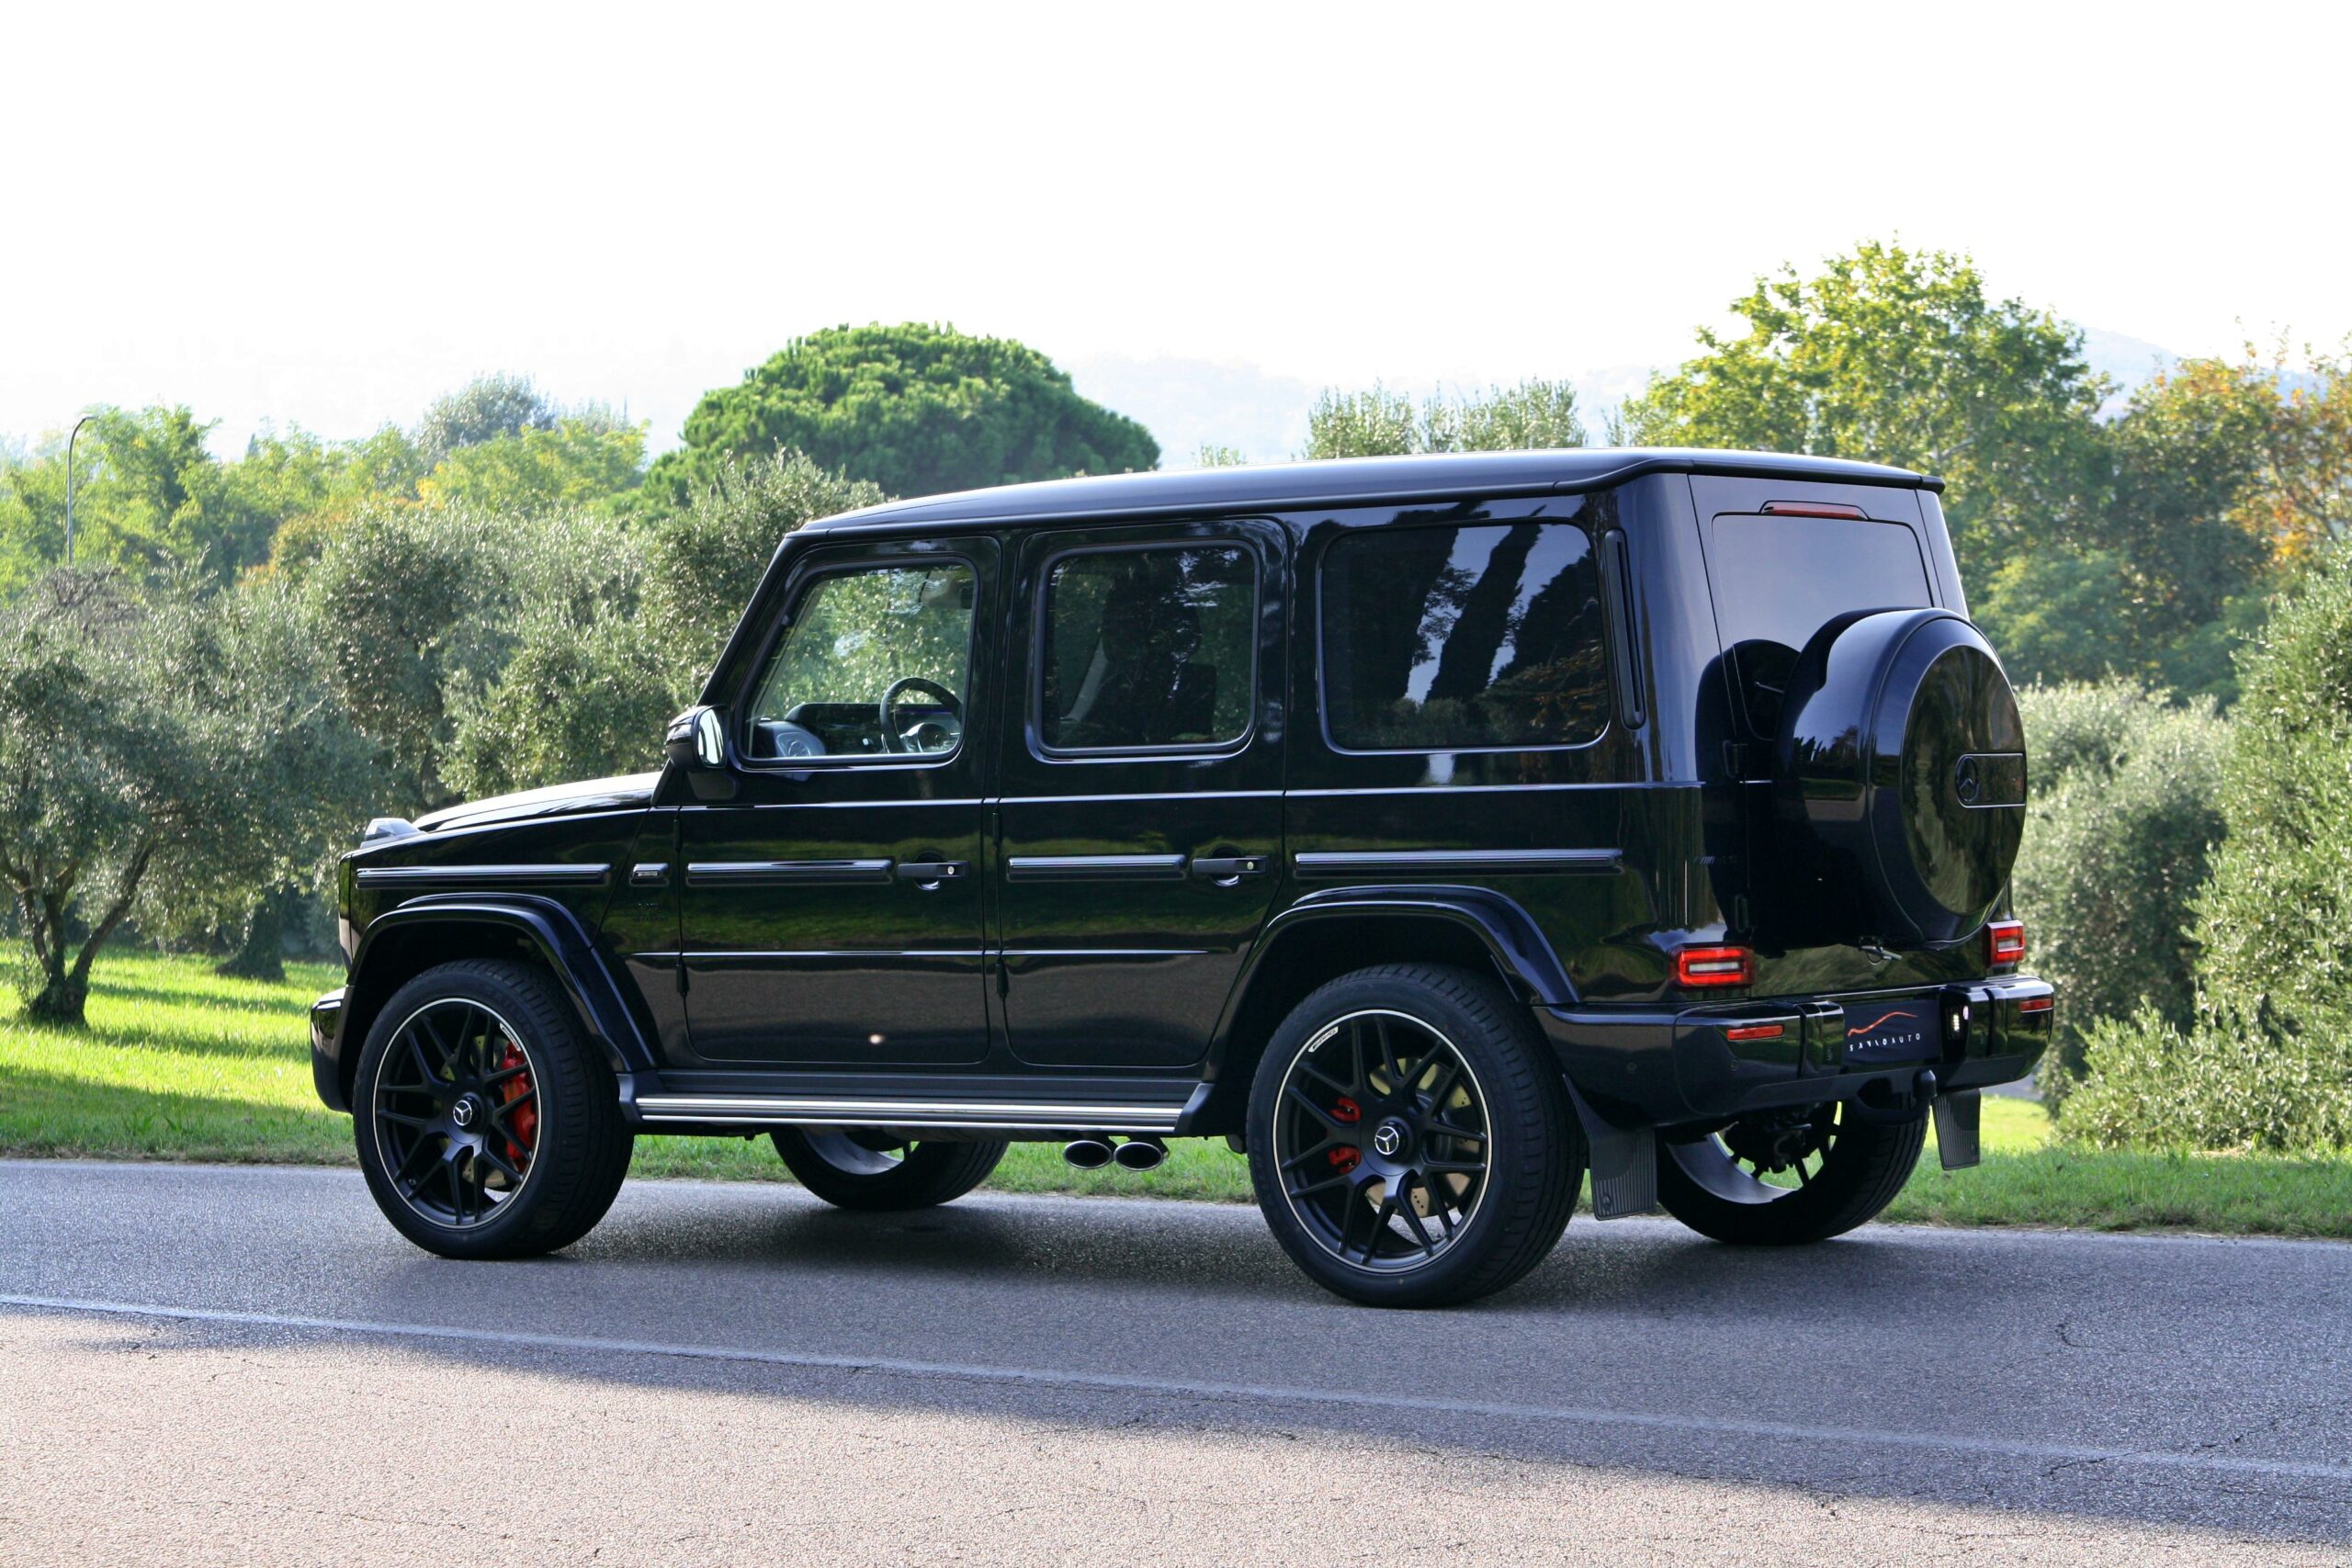 MERCEDES BENZ AMG G63 - Gallery img 04